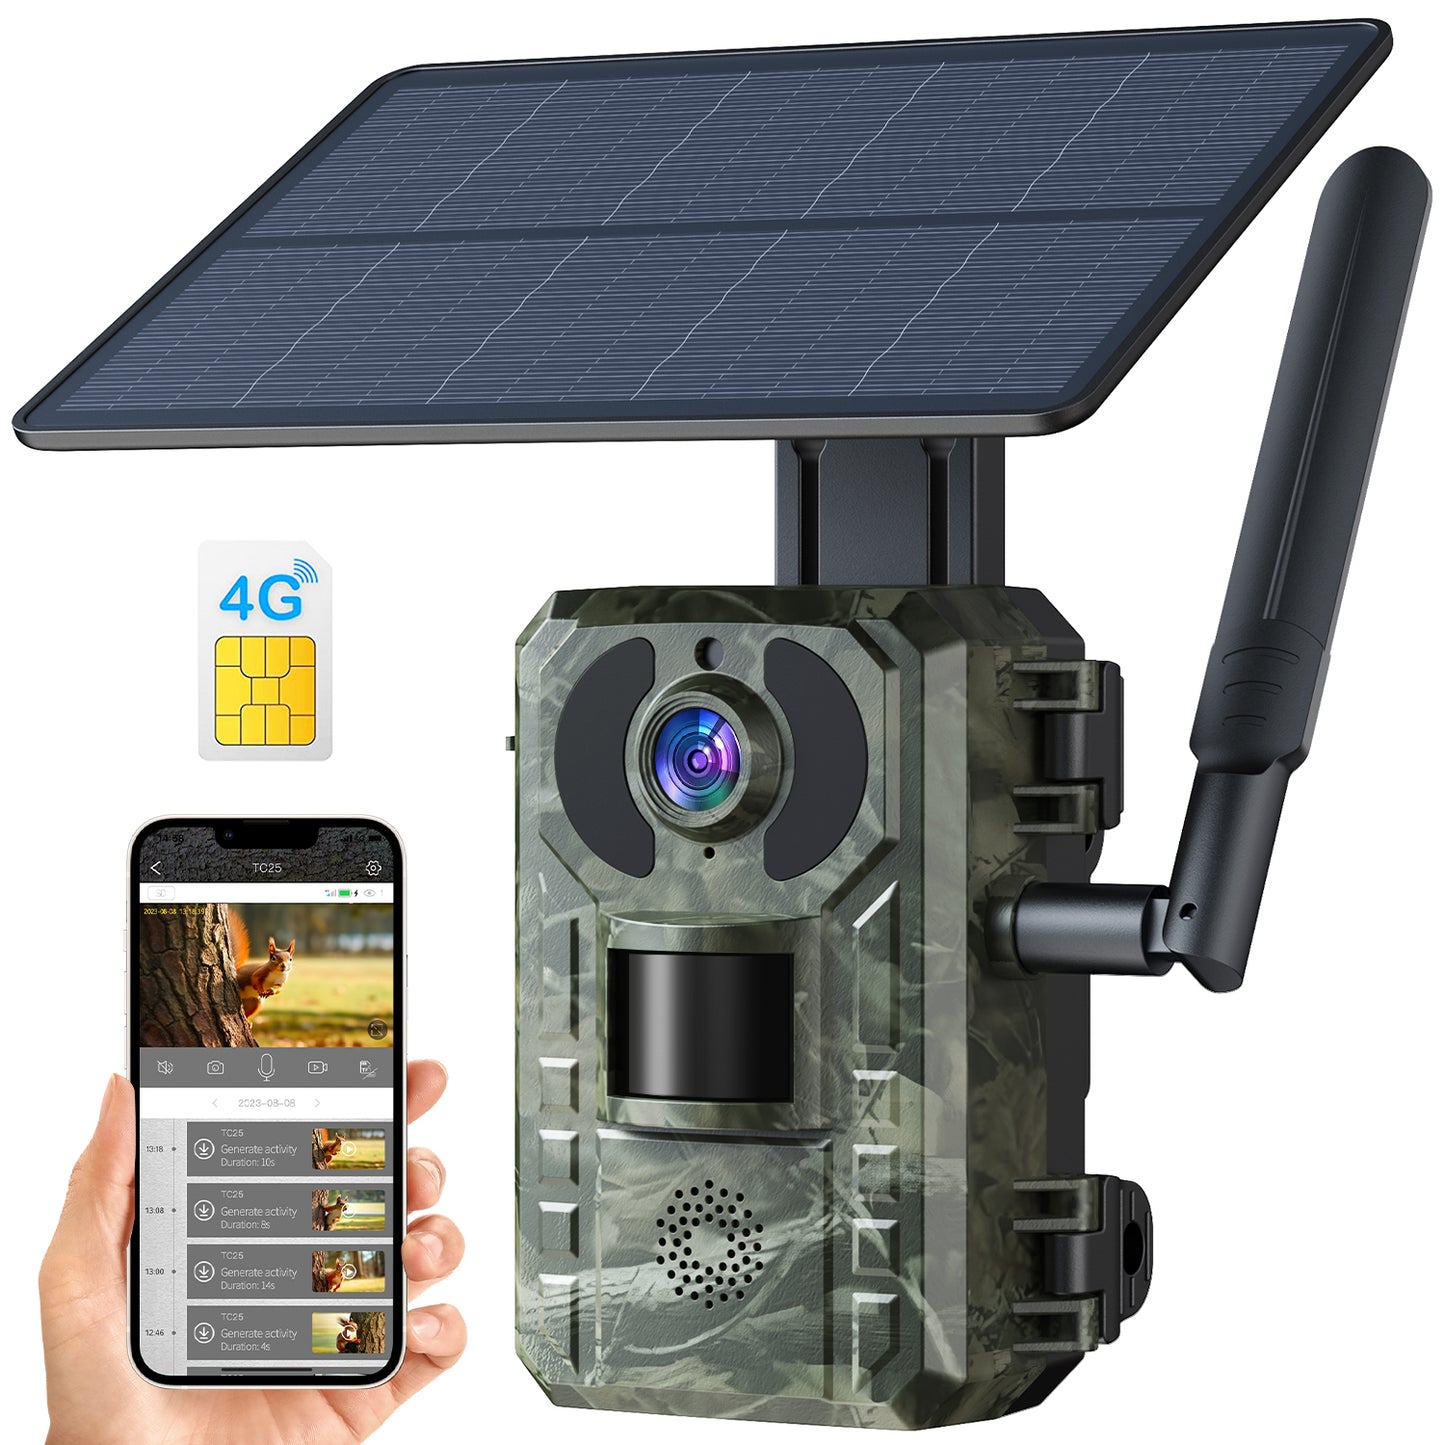 CAMPARK 4G Cellular Solar Trail Camera, 2.5K 14MP Hunting Game Camera with Live View and Motion Alerts, 940nm No Glow Night Vision and IP66 Waterproof for Wildlife Monitoring